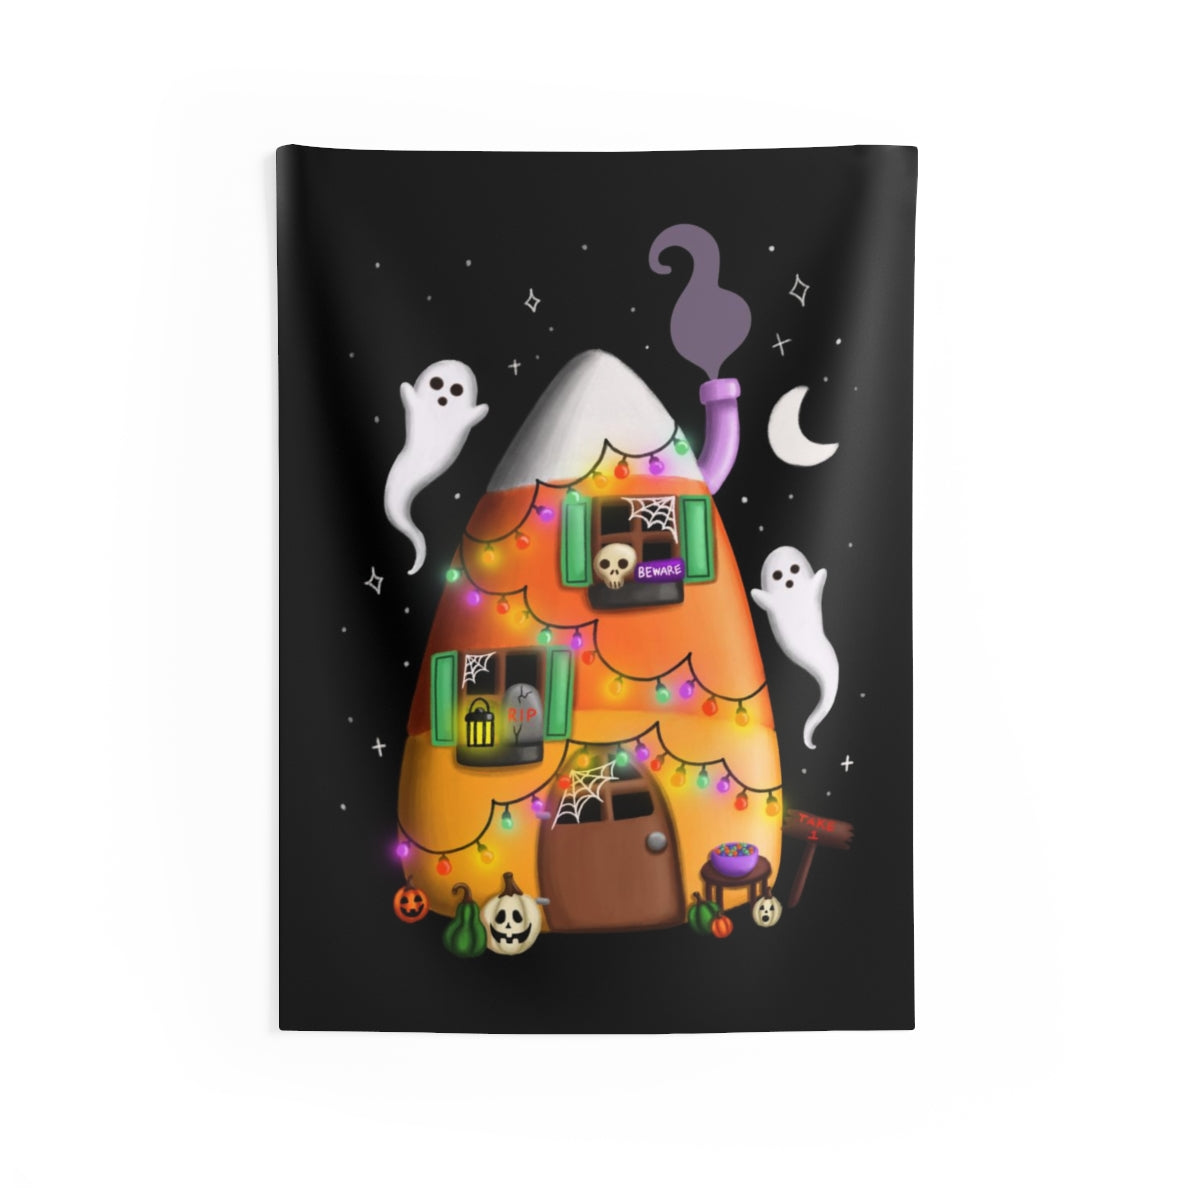 Candy Corn House Wall Tapestries